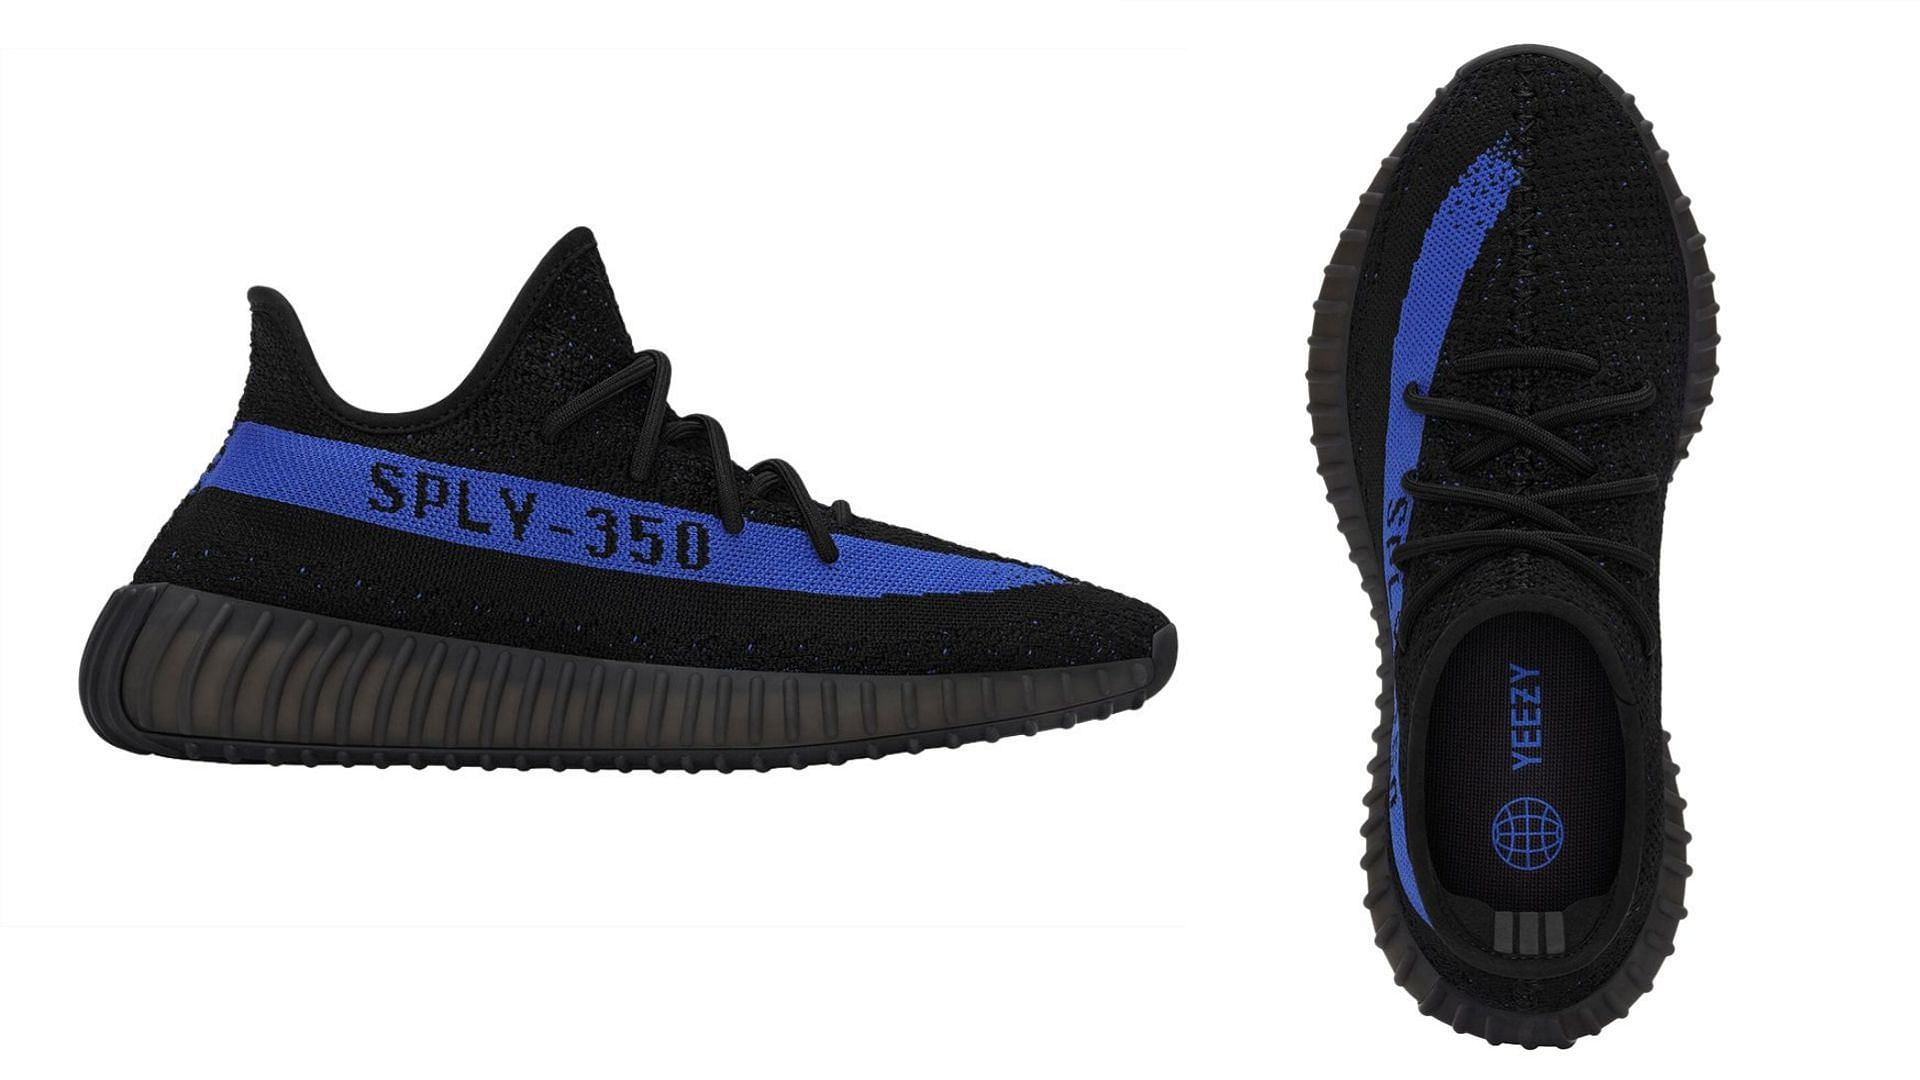 A closer look at the Dazzling Blue colorway shoes (Image via Adidas Yeezy)